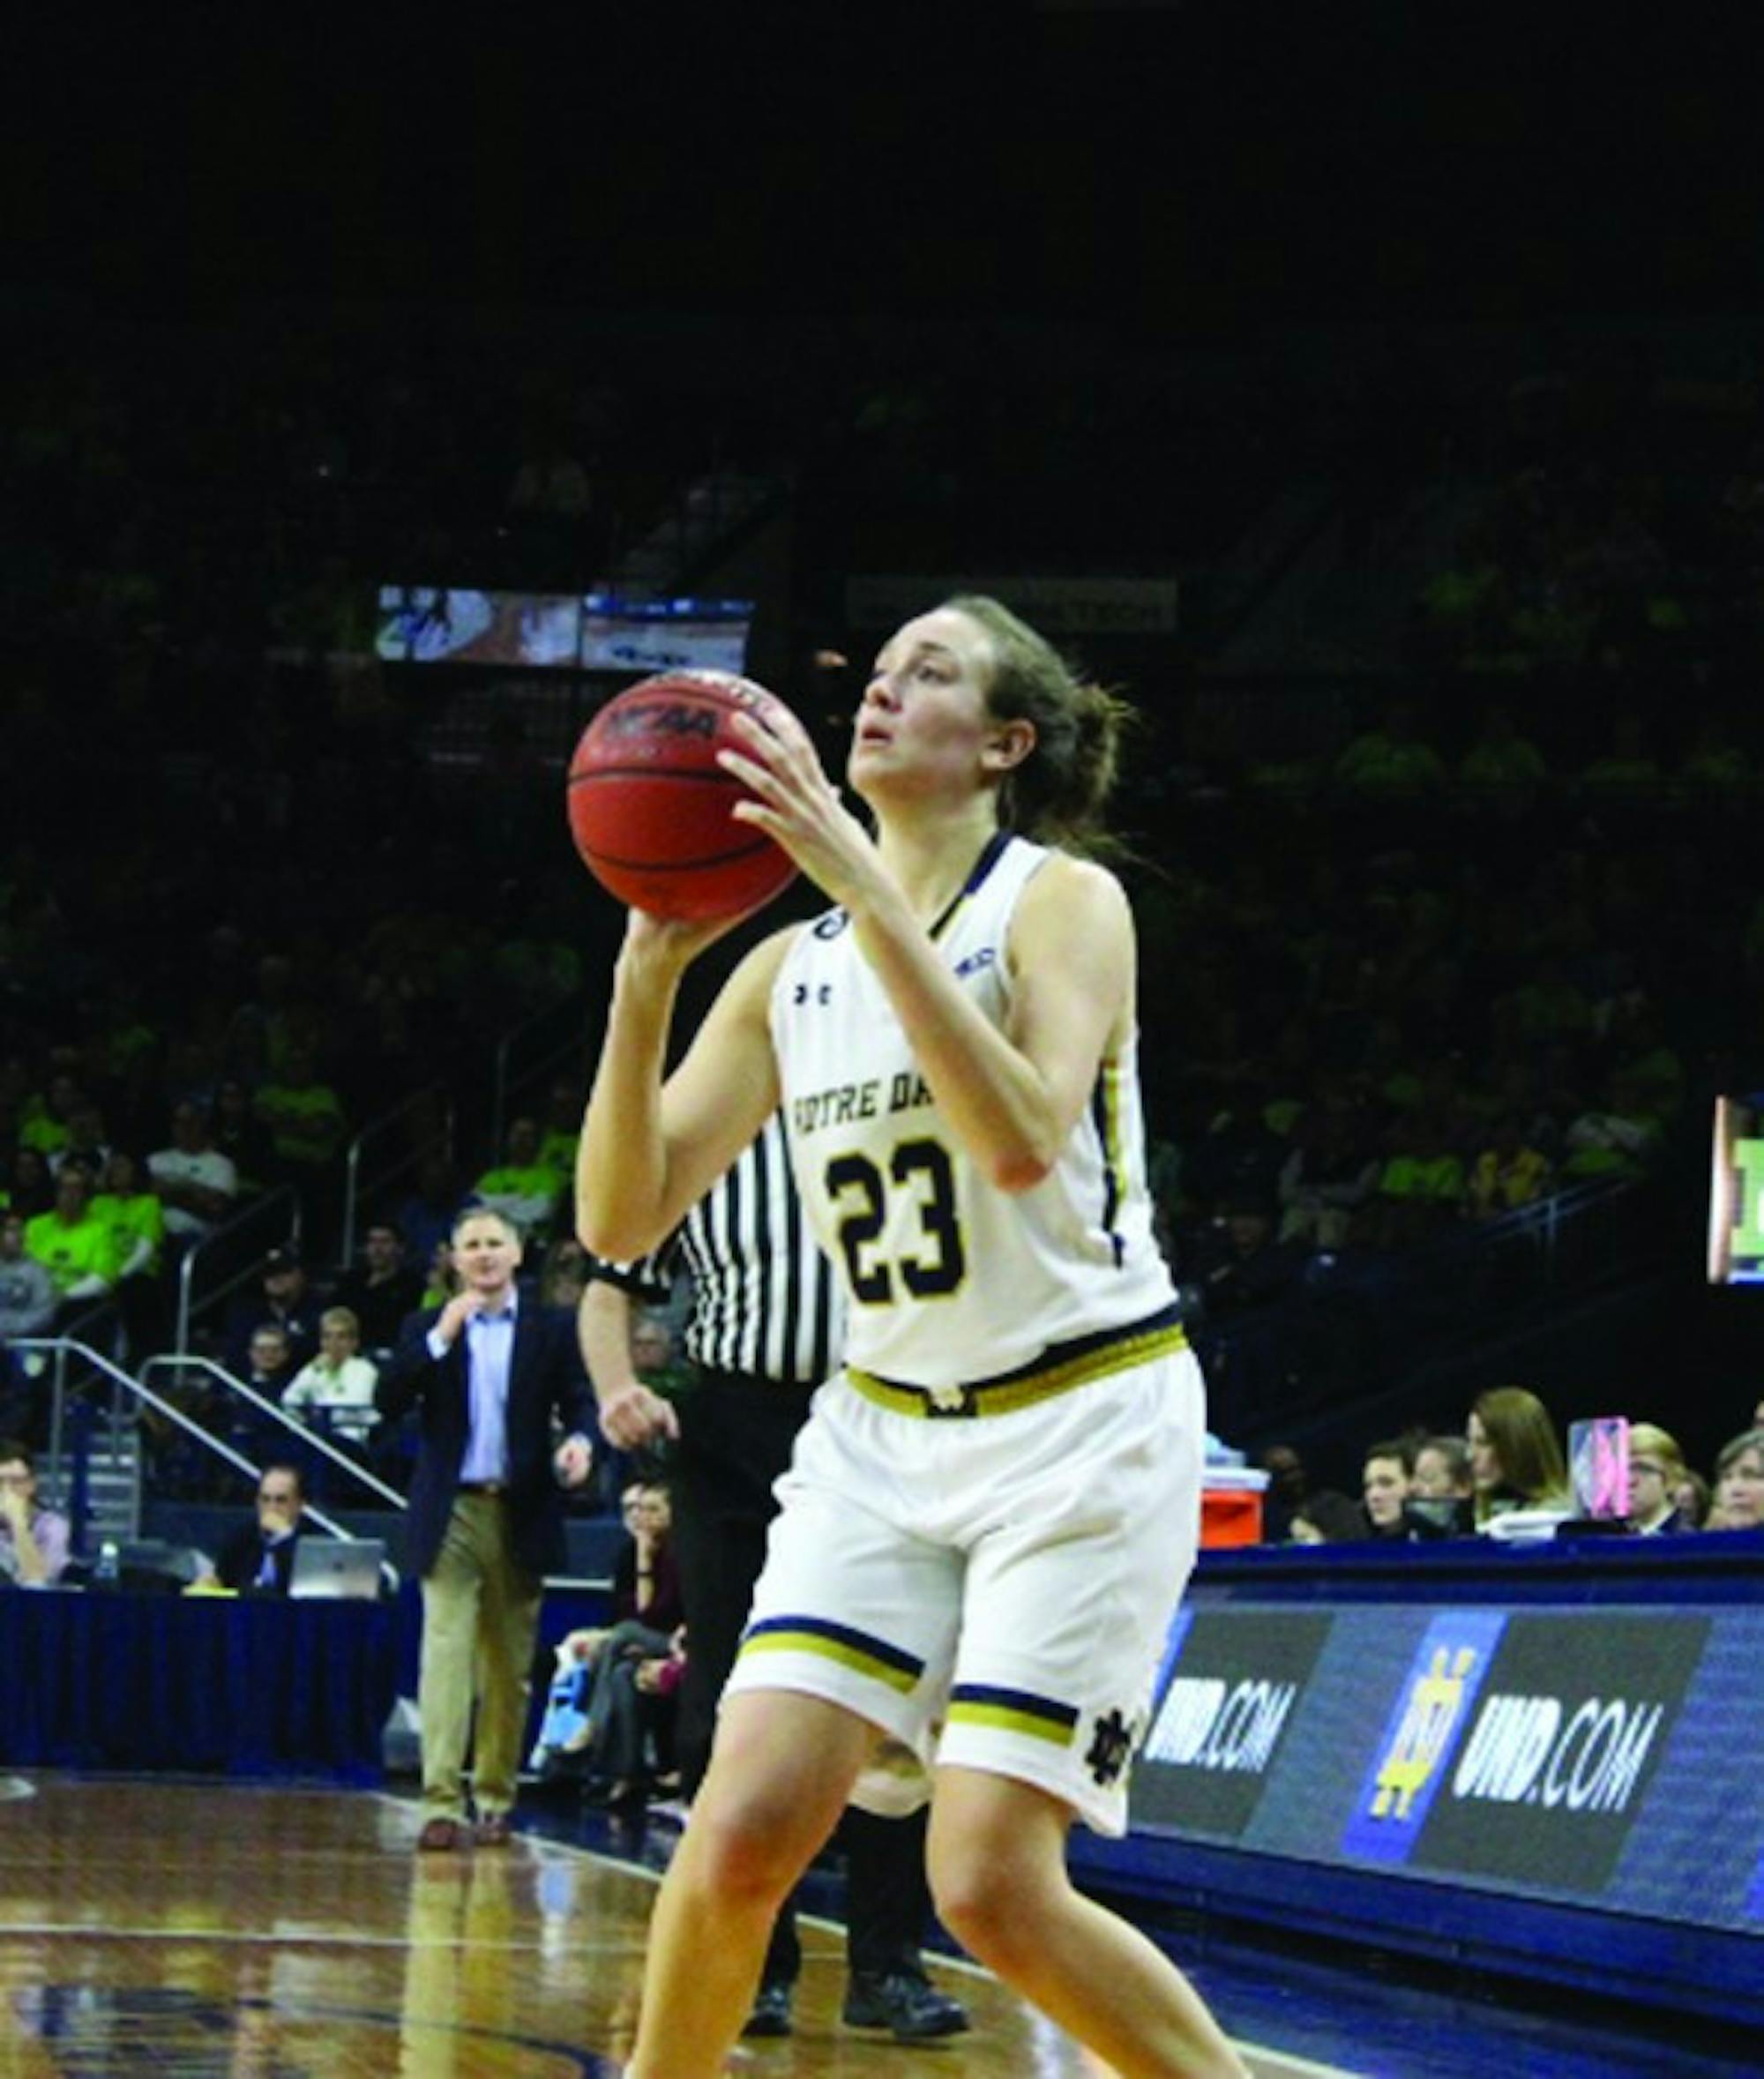 Irish senior guard Michaela Mabrey readies to shoot a 3-pointer during Notre Dame’s 70-58 victory over Boston College on Saturday at Purcell Pavilion. Mabrey was one of three players honored on Senior Night.